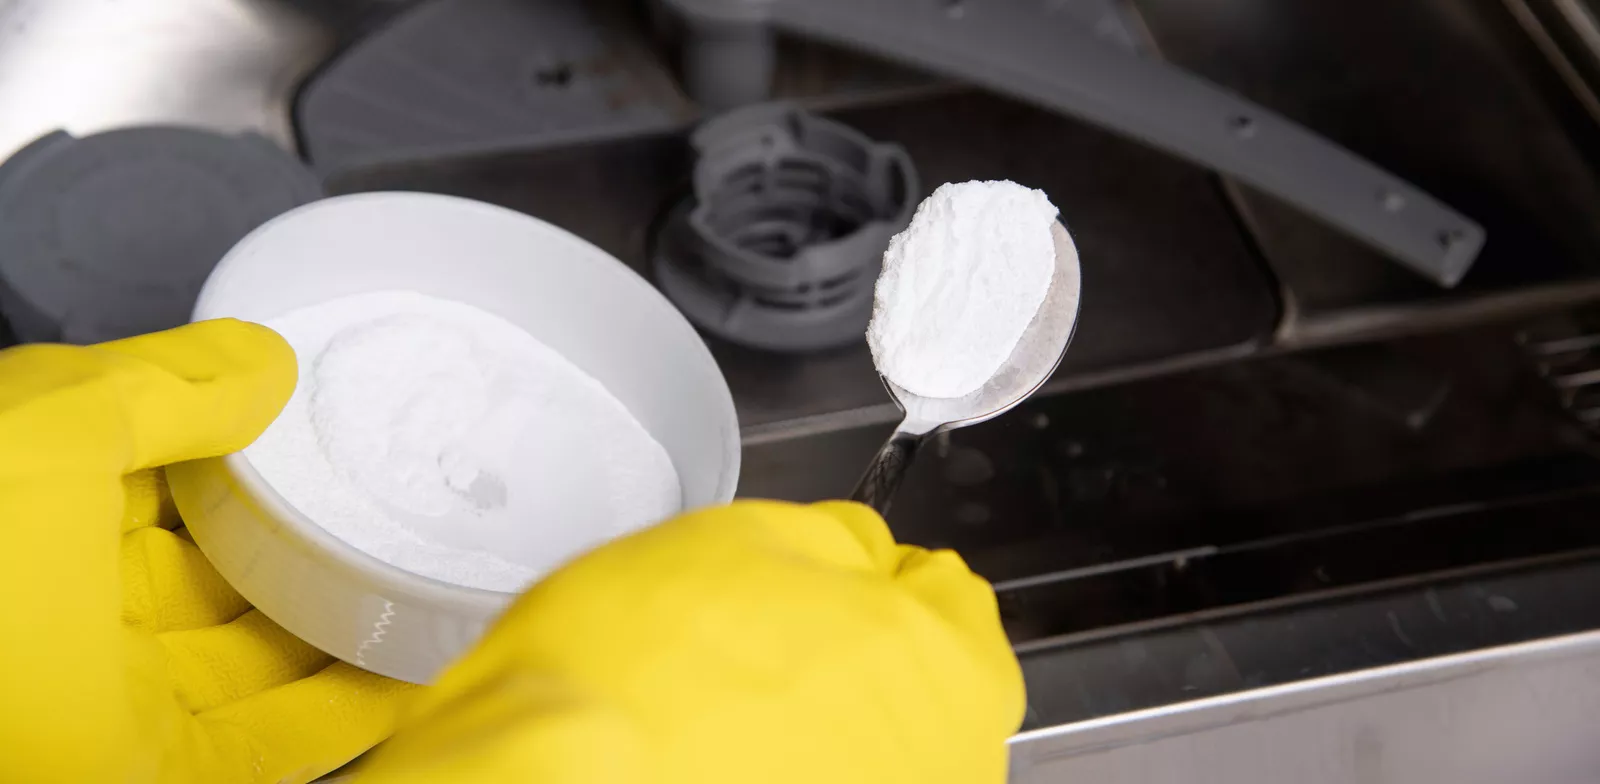 Kärcher tip: Descaling the dishwasher with household remedies